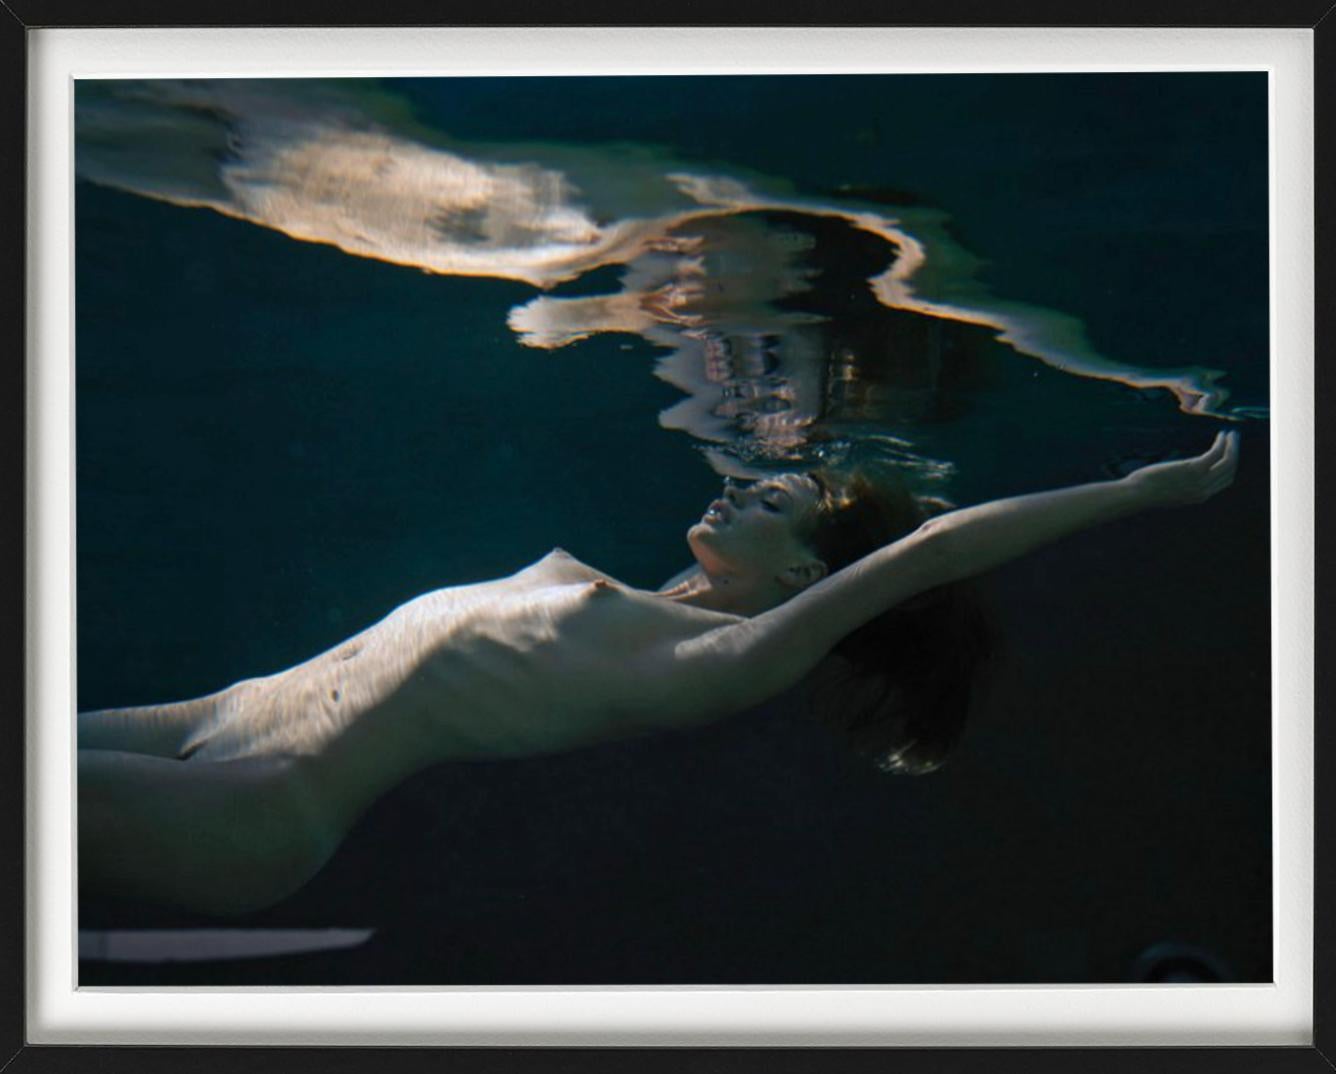 Water Nude, Los Angeles - Black Nude Photograph by Michel Comte